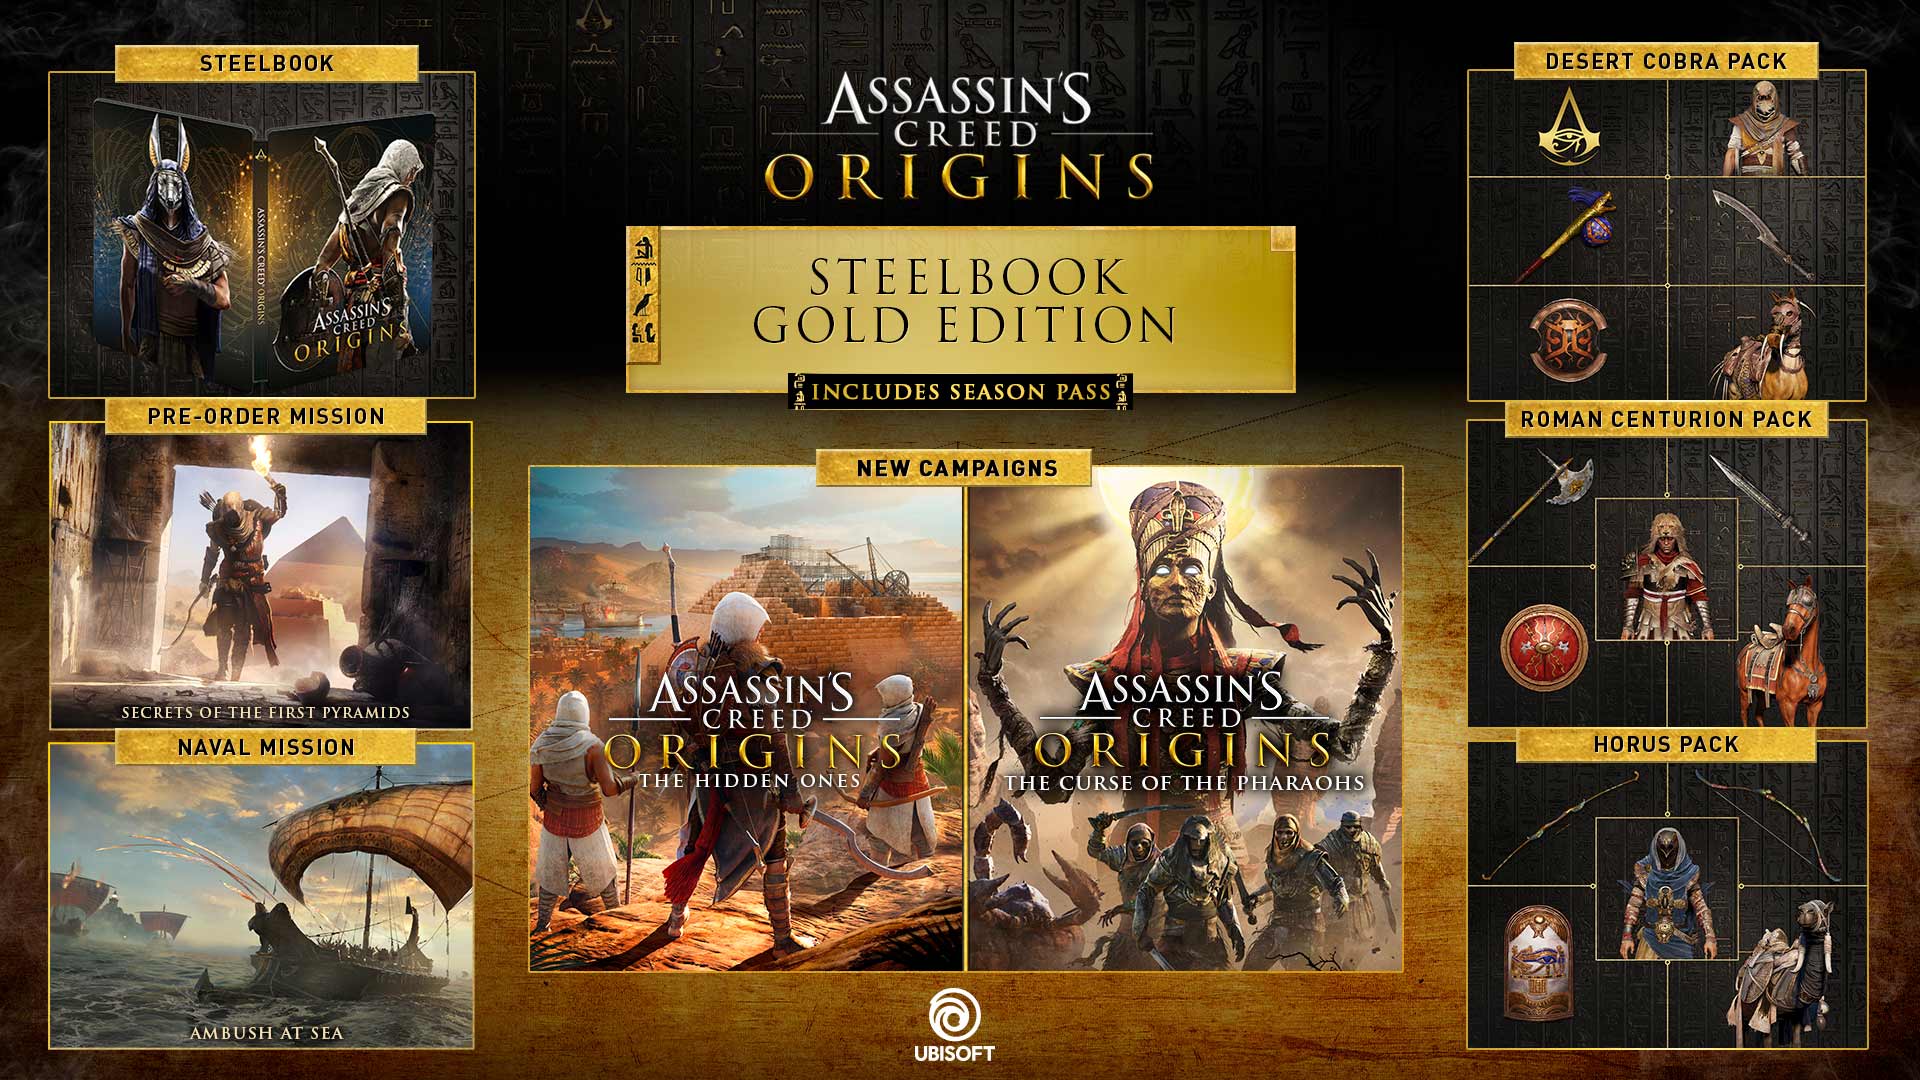 Buy Assassin S Creed Origins Steelbook Gold Edition For Ps4 And Xbox One Ubisoft Official Store